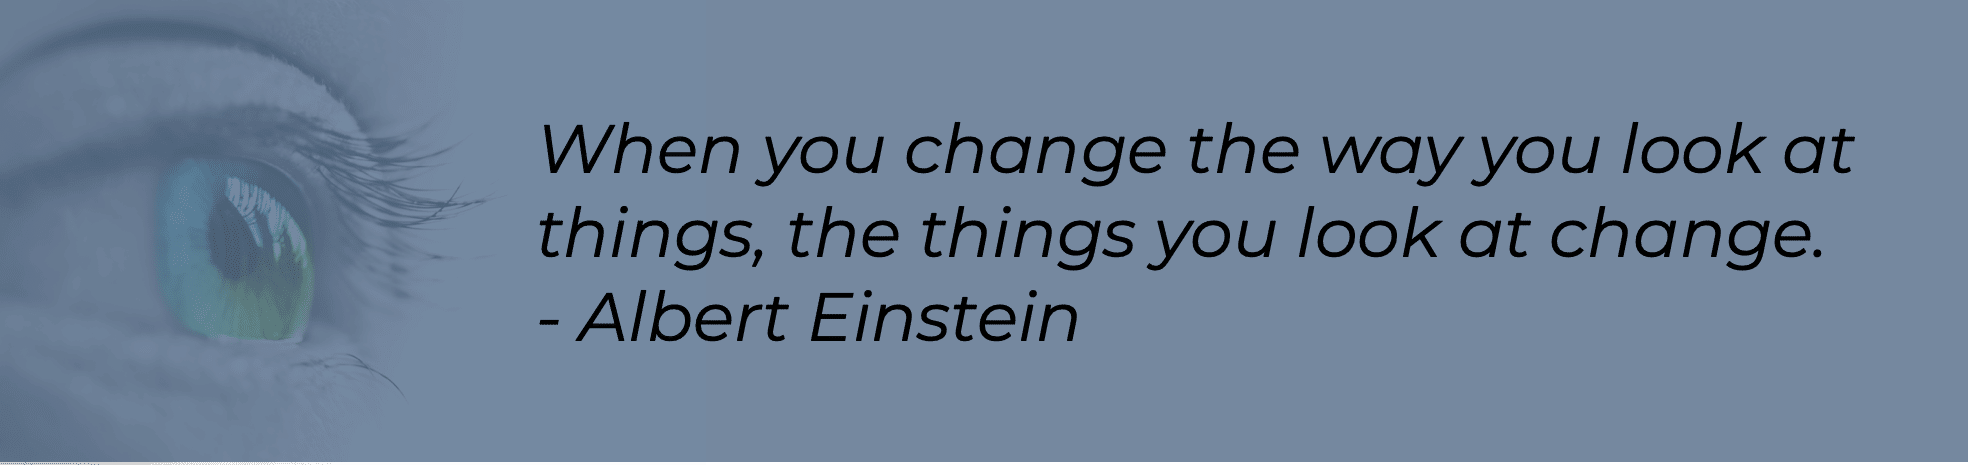 Compassionate-Accountability-Einstein - When you change the way you look at things